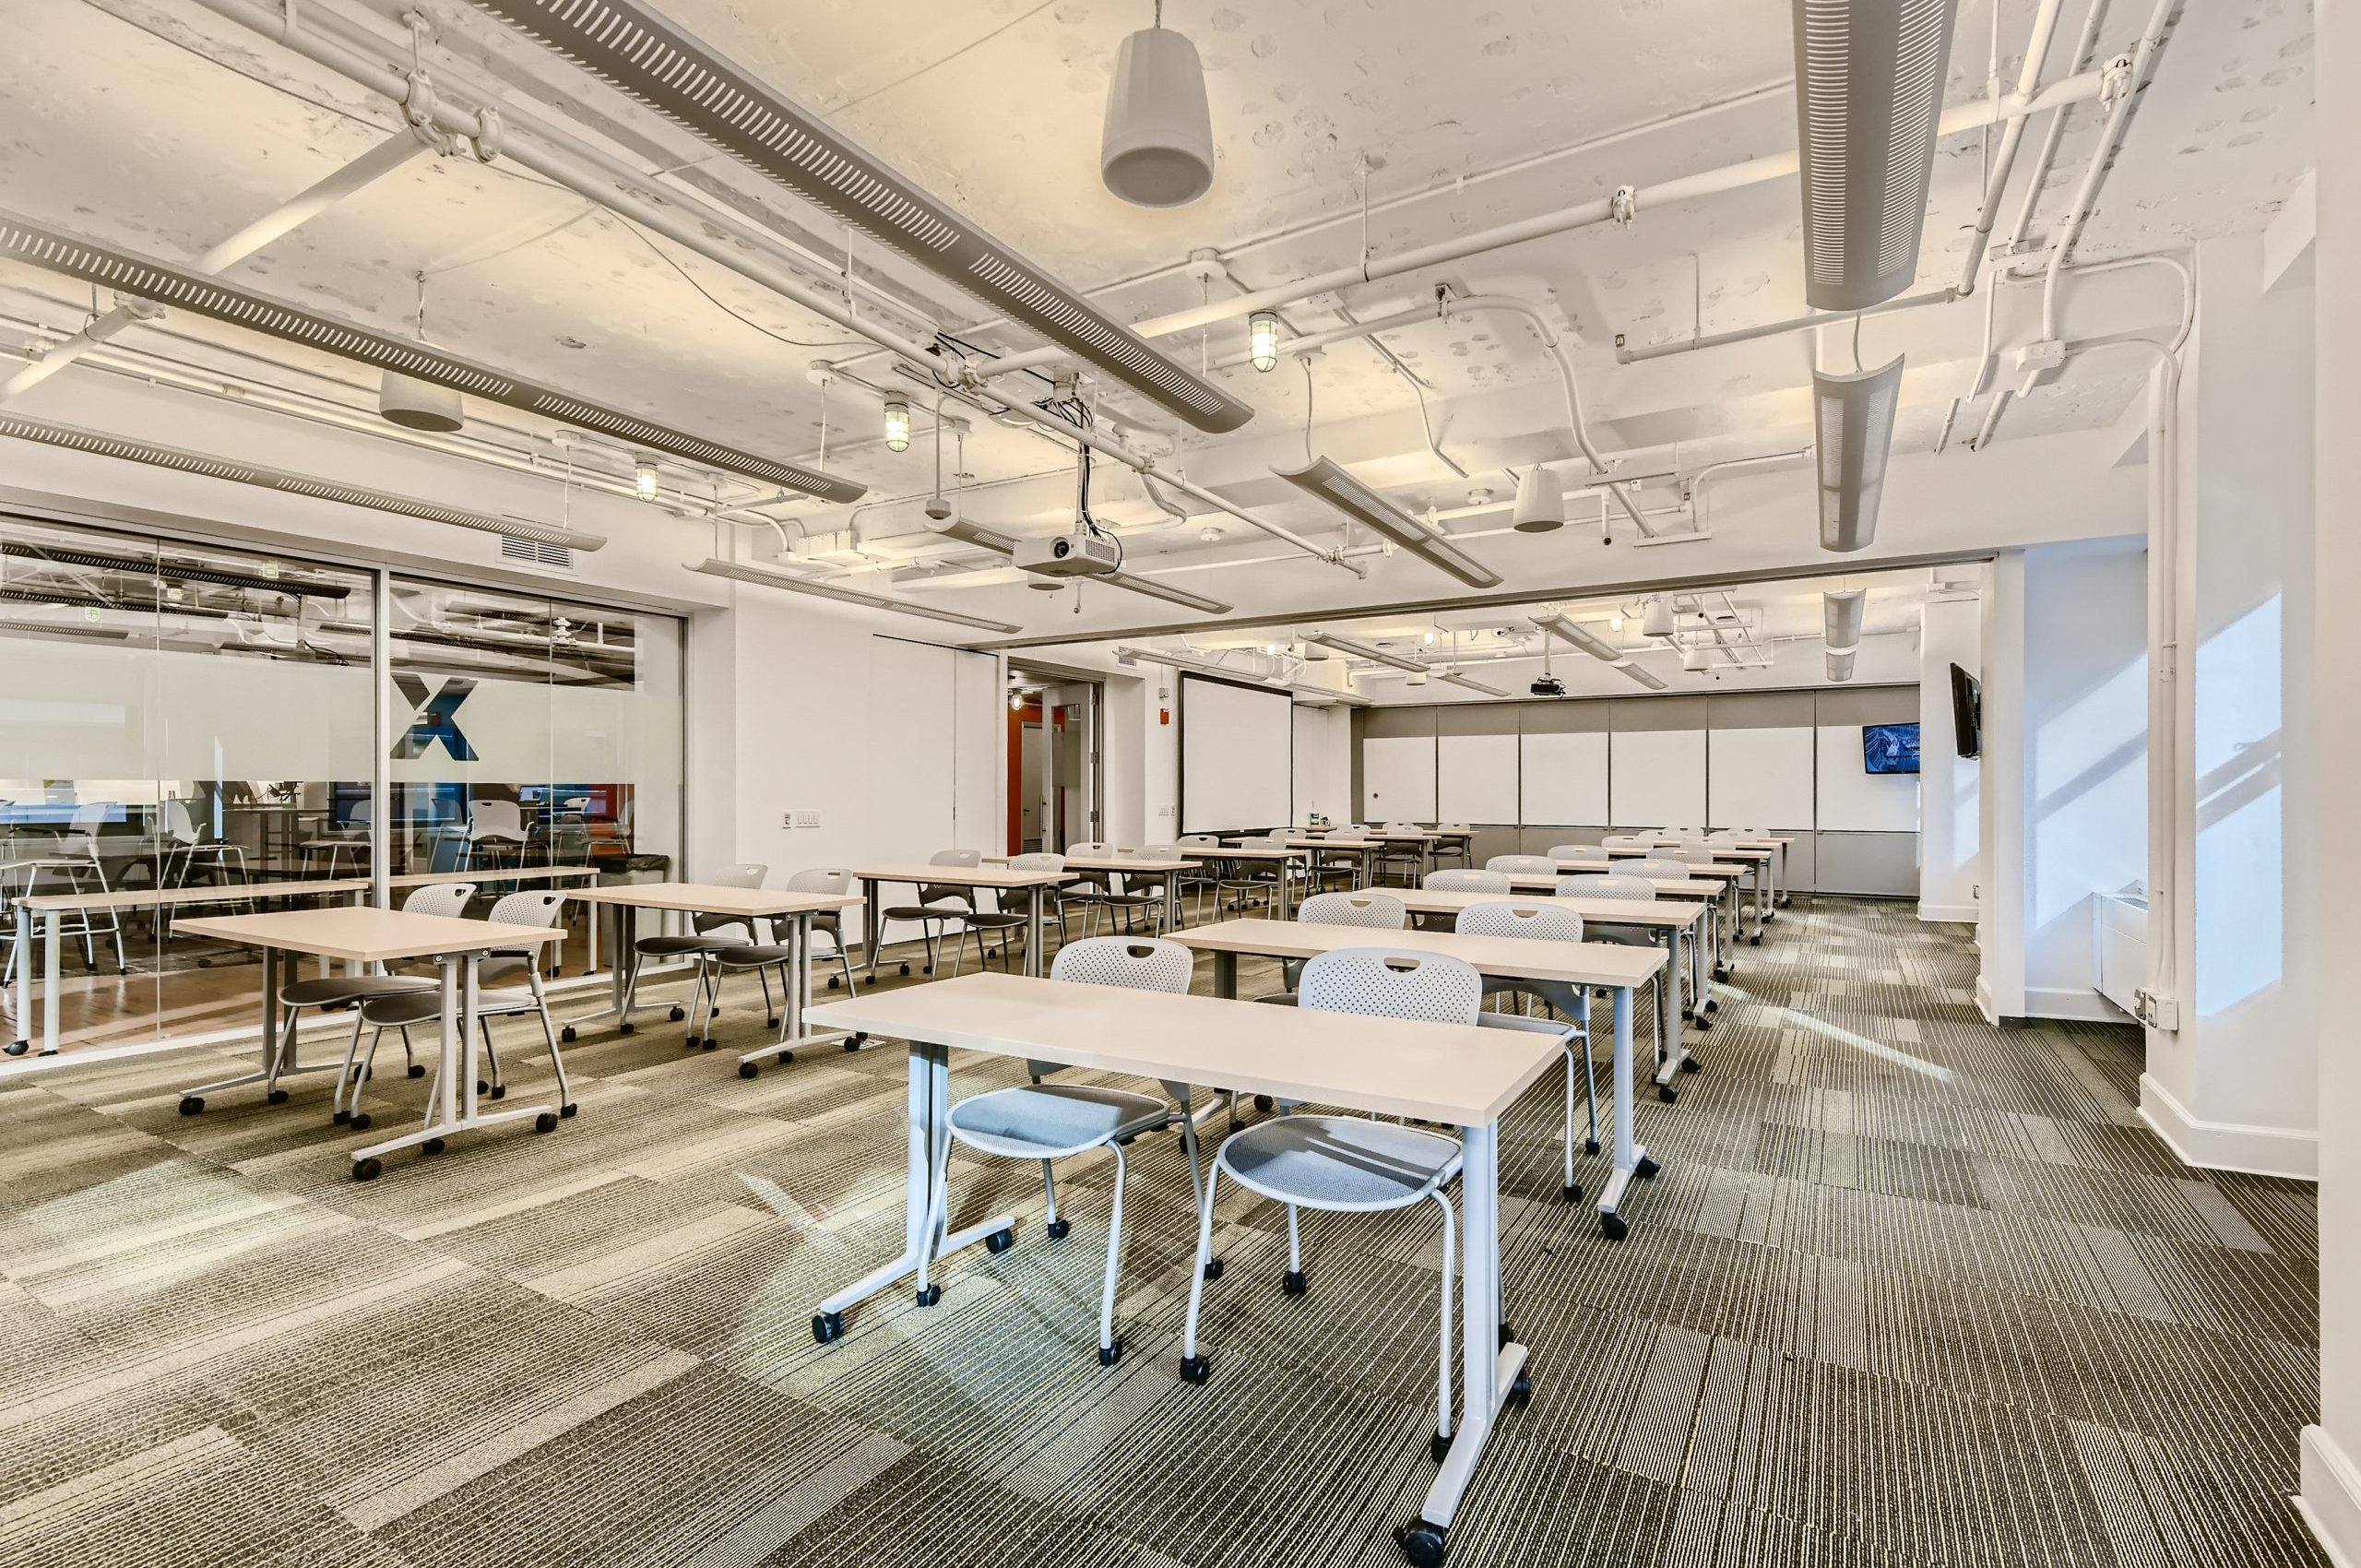 Conference Rooms C+D in the Classroom style